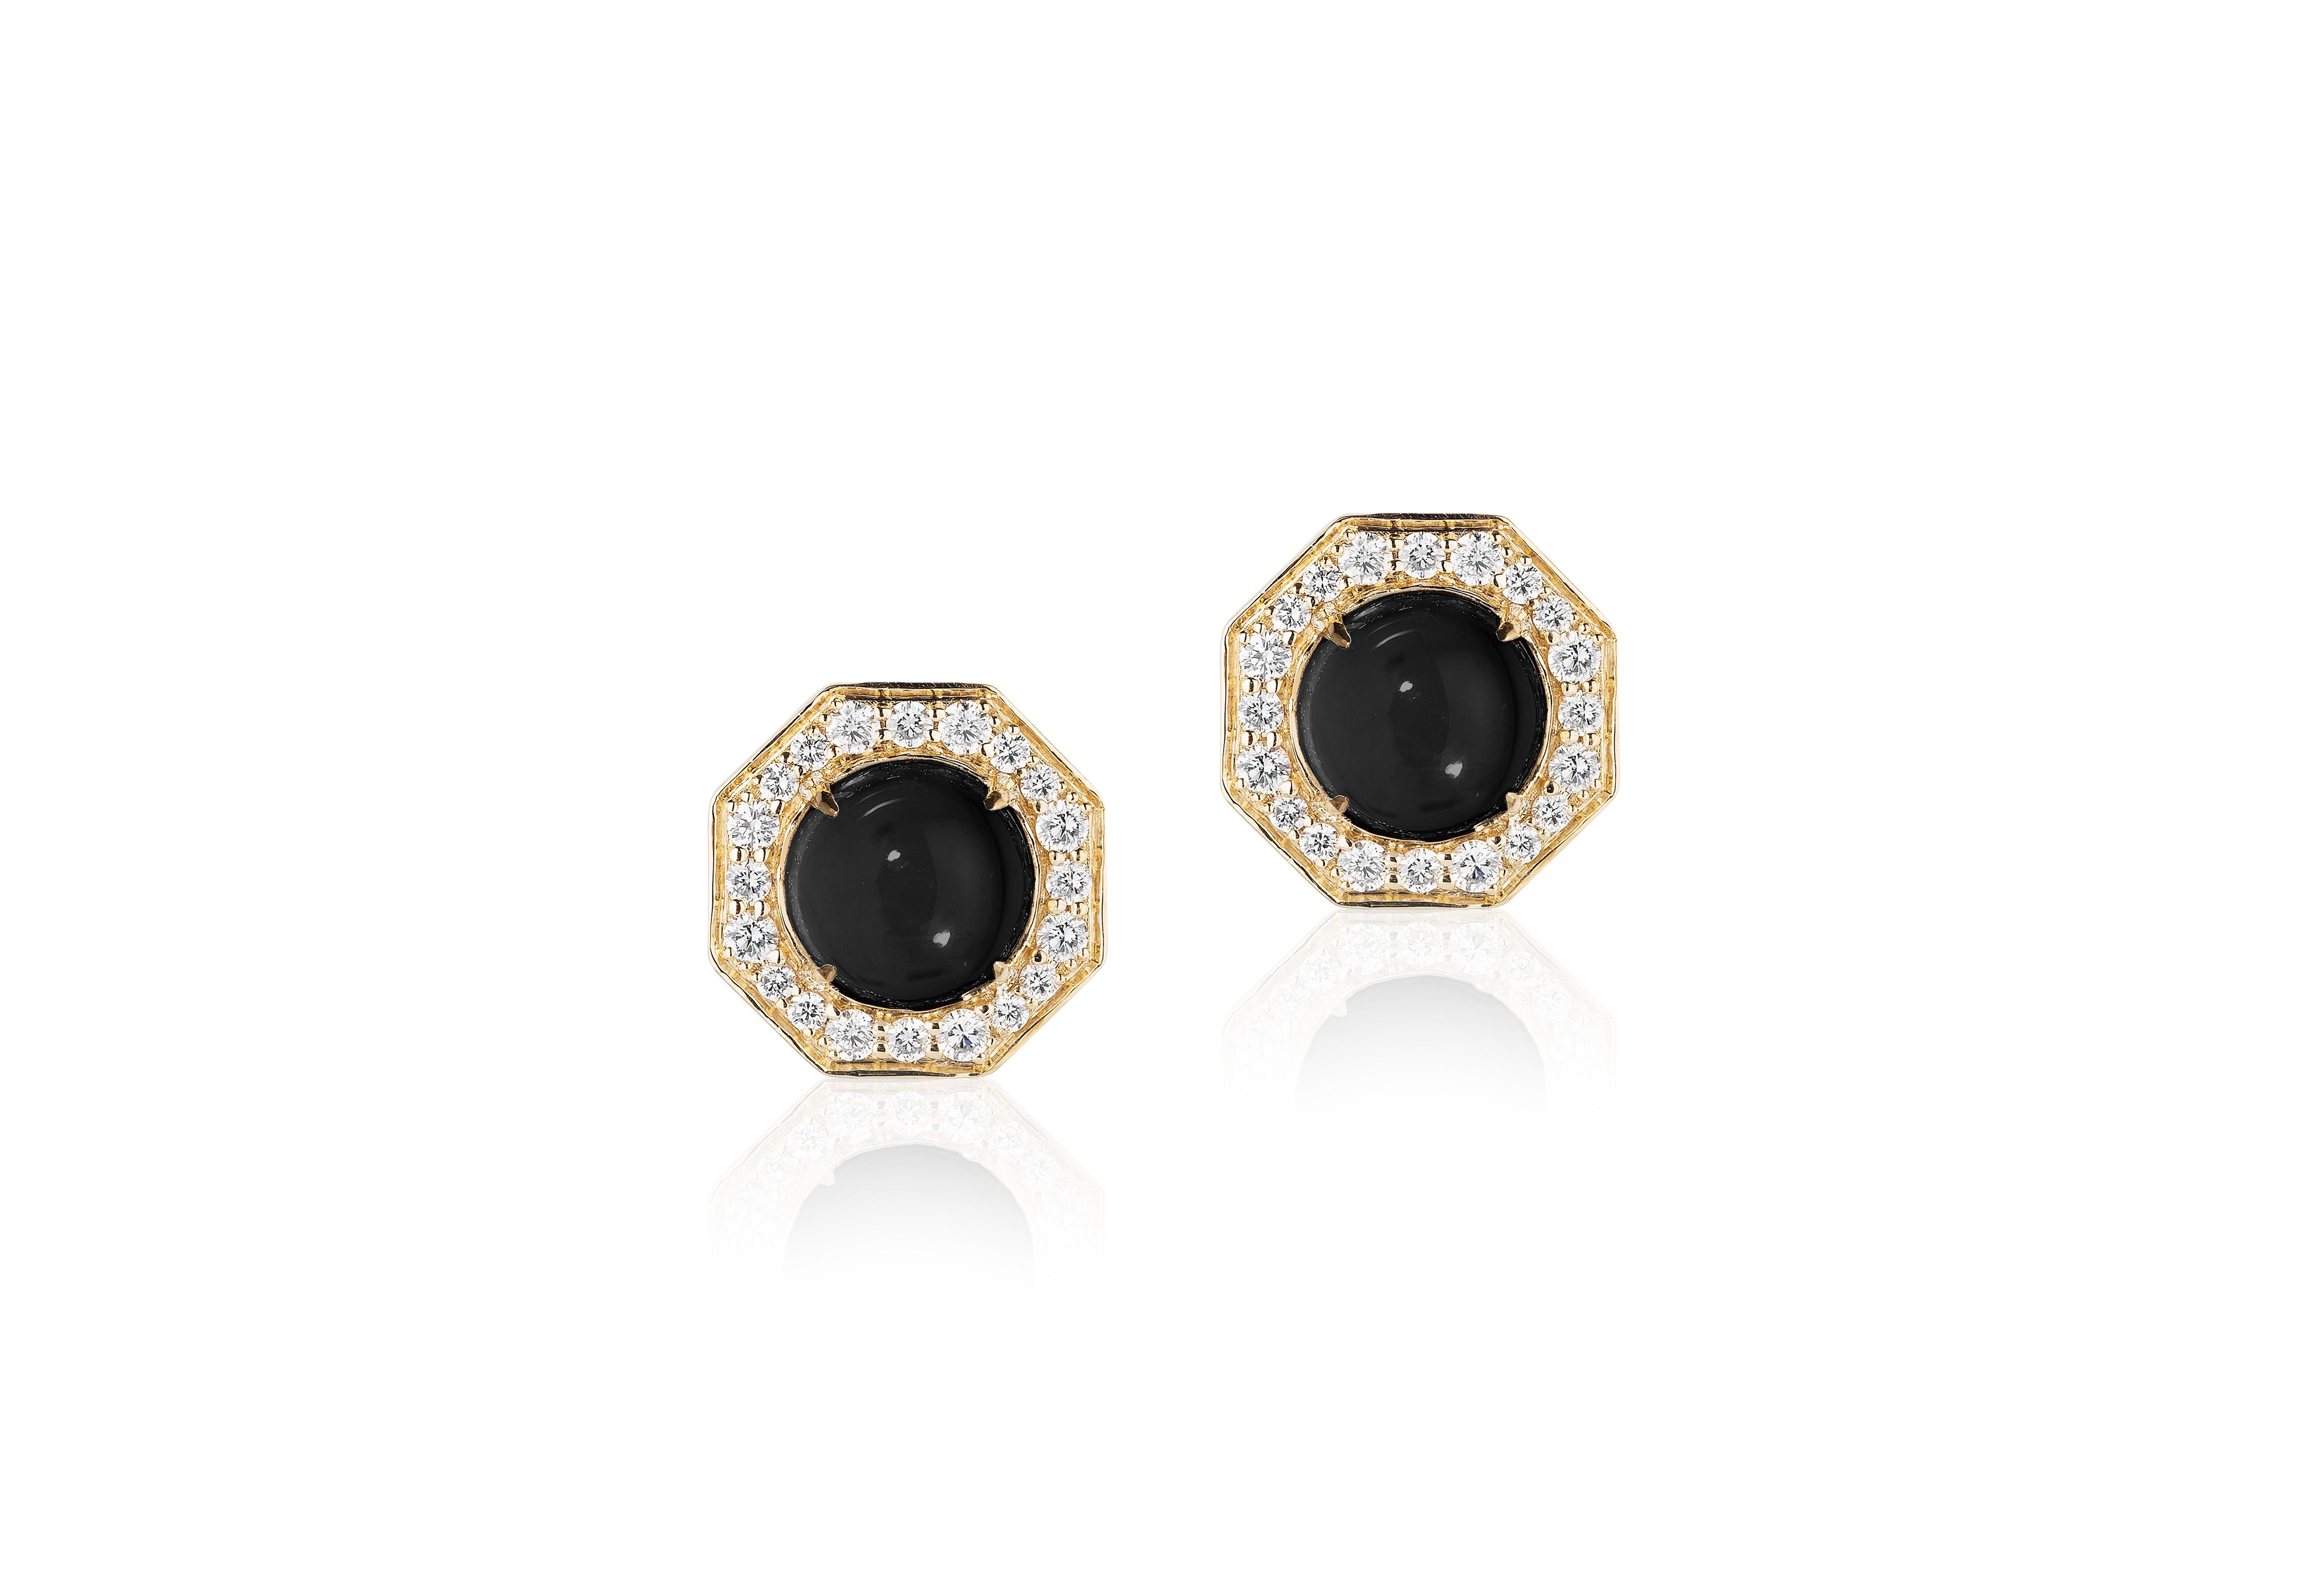 Onyx Cabochon Stud Earrings with Diamonds in 18k Yellow Gold, from 'Rock N Roll' Collection

Stone Size: 8 mm

Gemstone Weight: 4.74 Carats

Diamond: G-H / VS, Approx Wt: 0.60 Carats